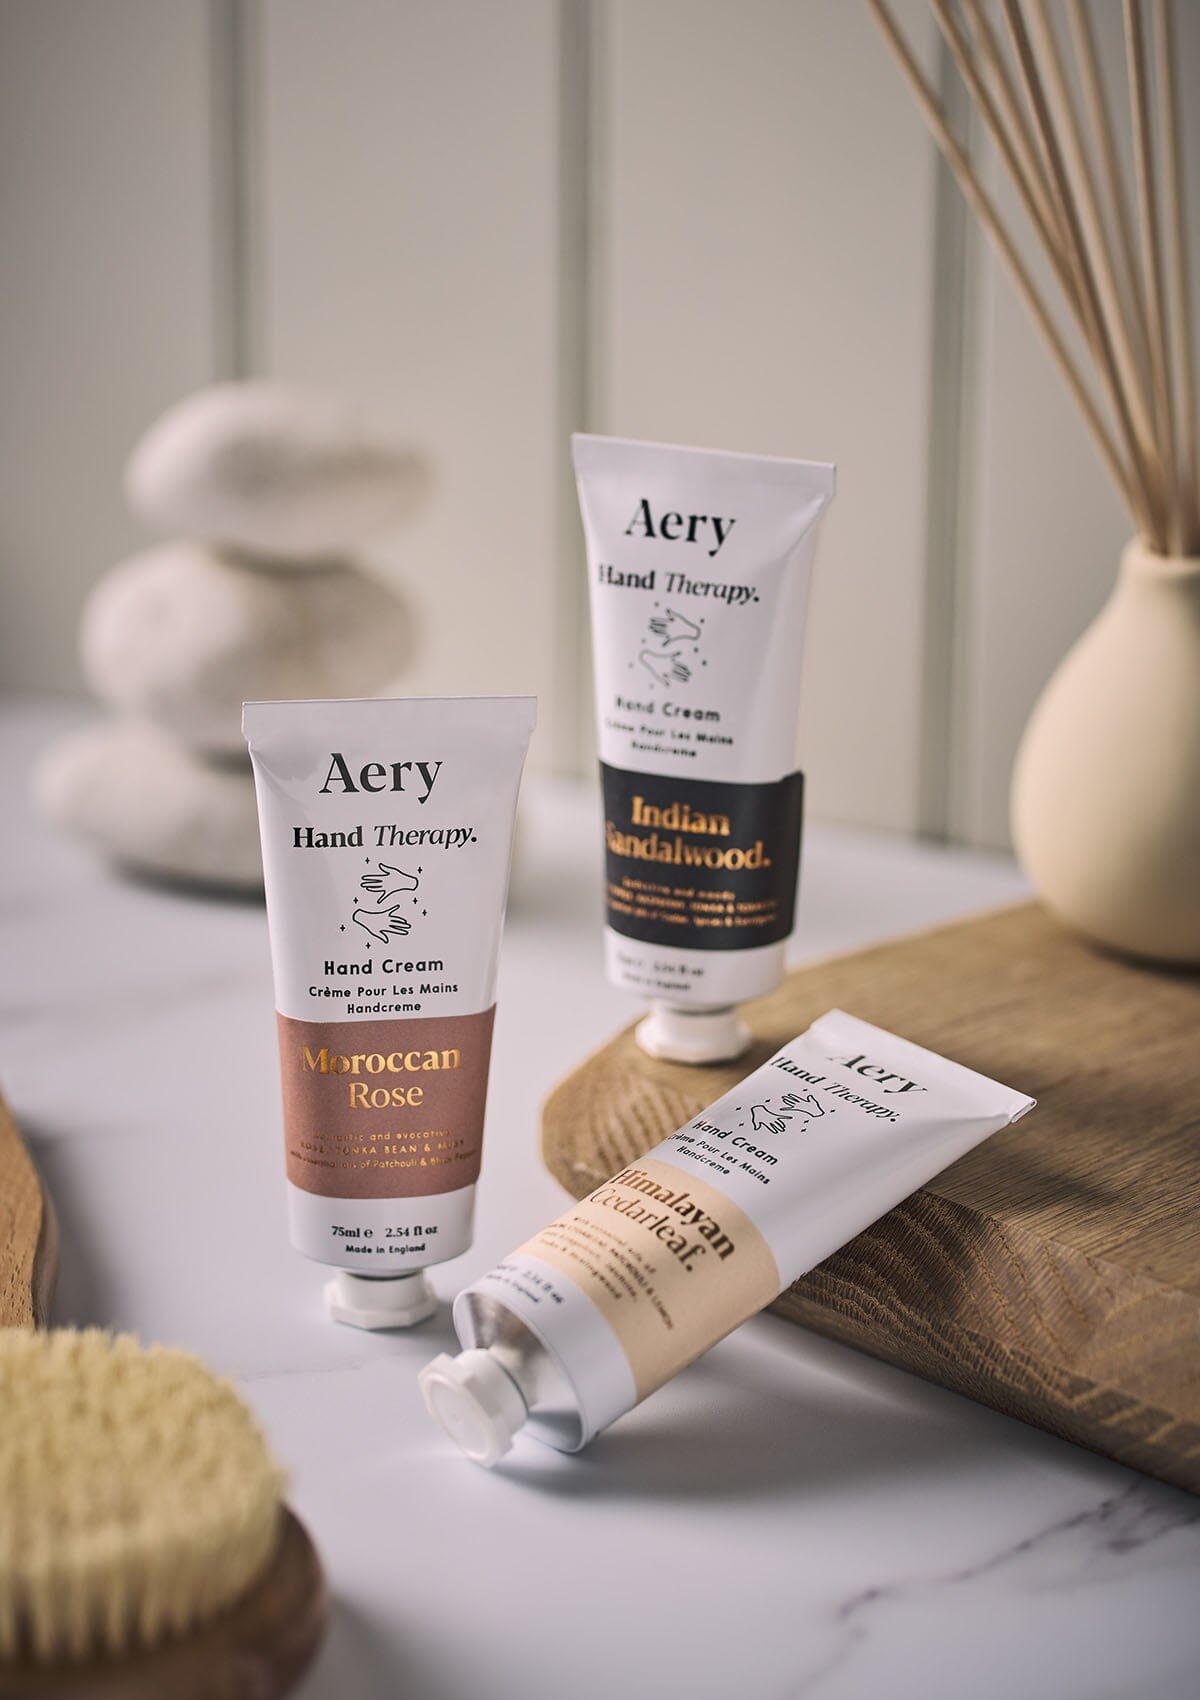 Aubergine Moroccan Rose hand cream by Aery displayed next to Indian Sandalwood hand cream placed in bathroom  